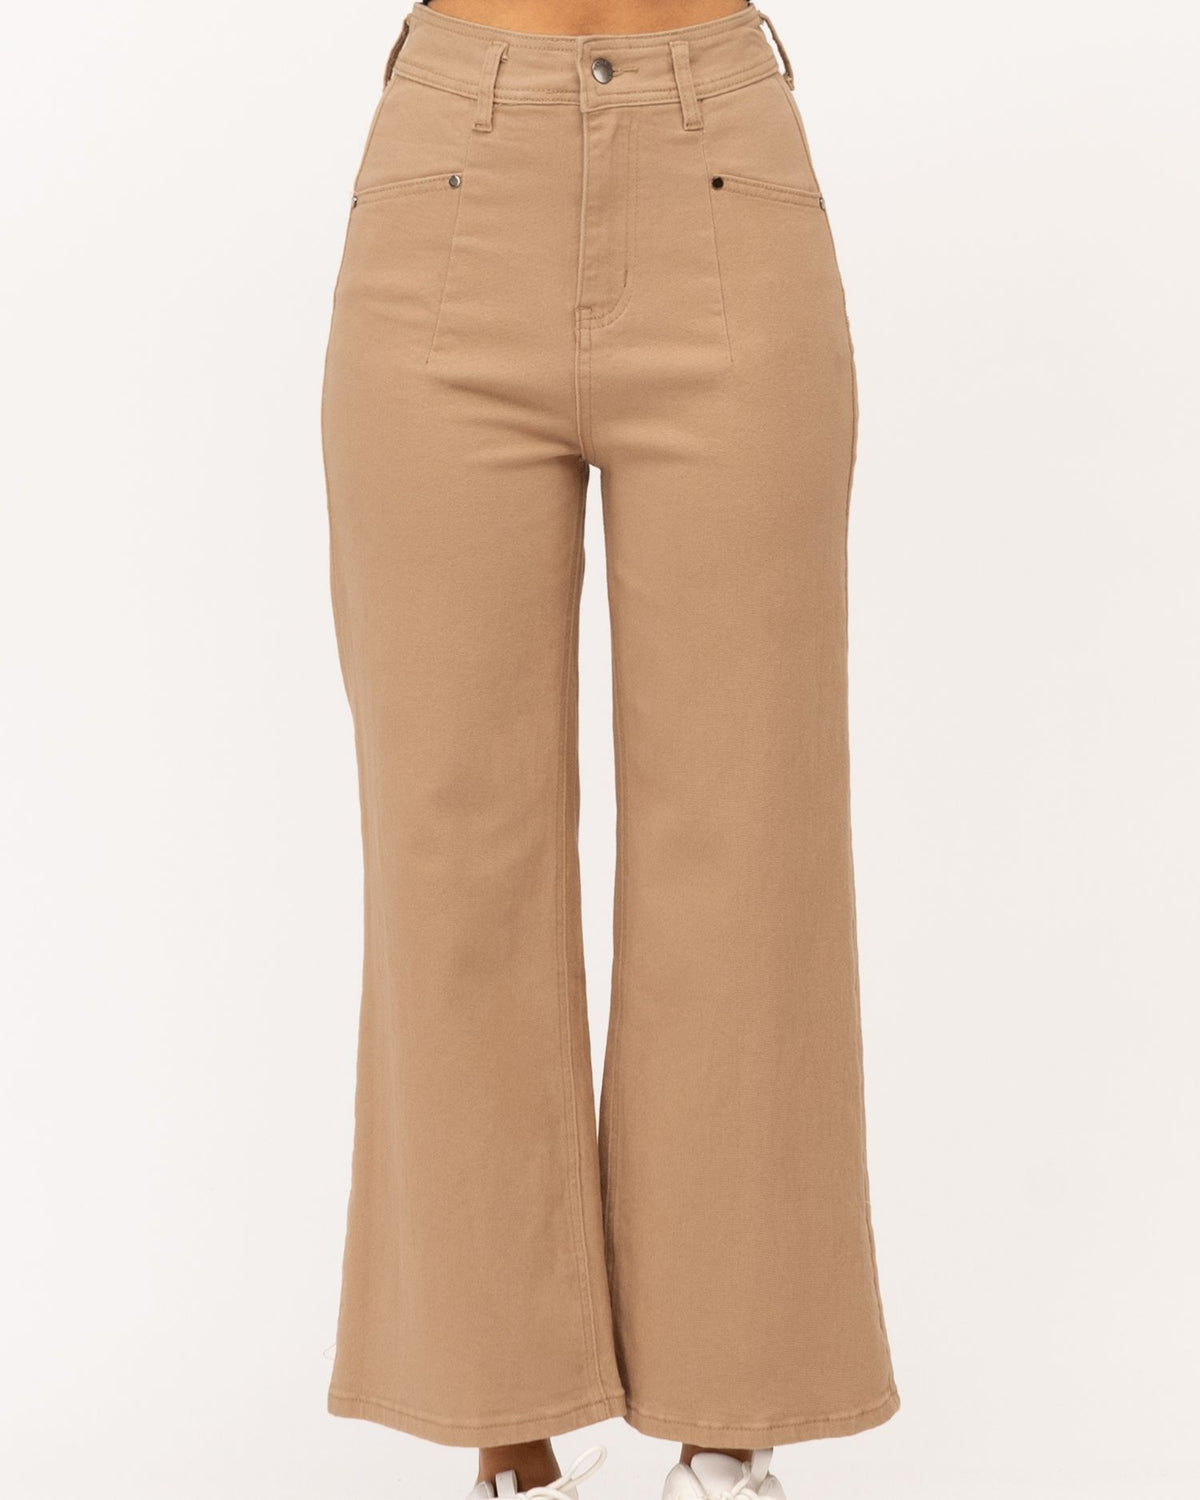 NATURAL CROPPED WIDE LEG JEANS